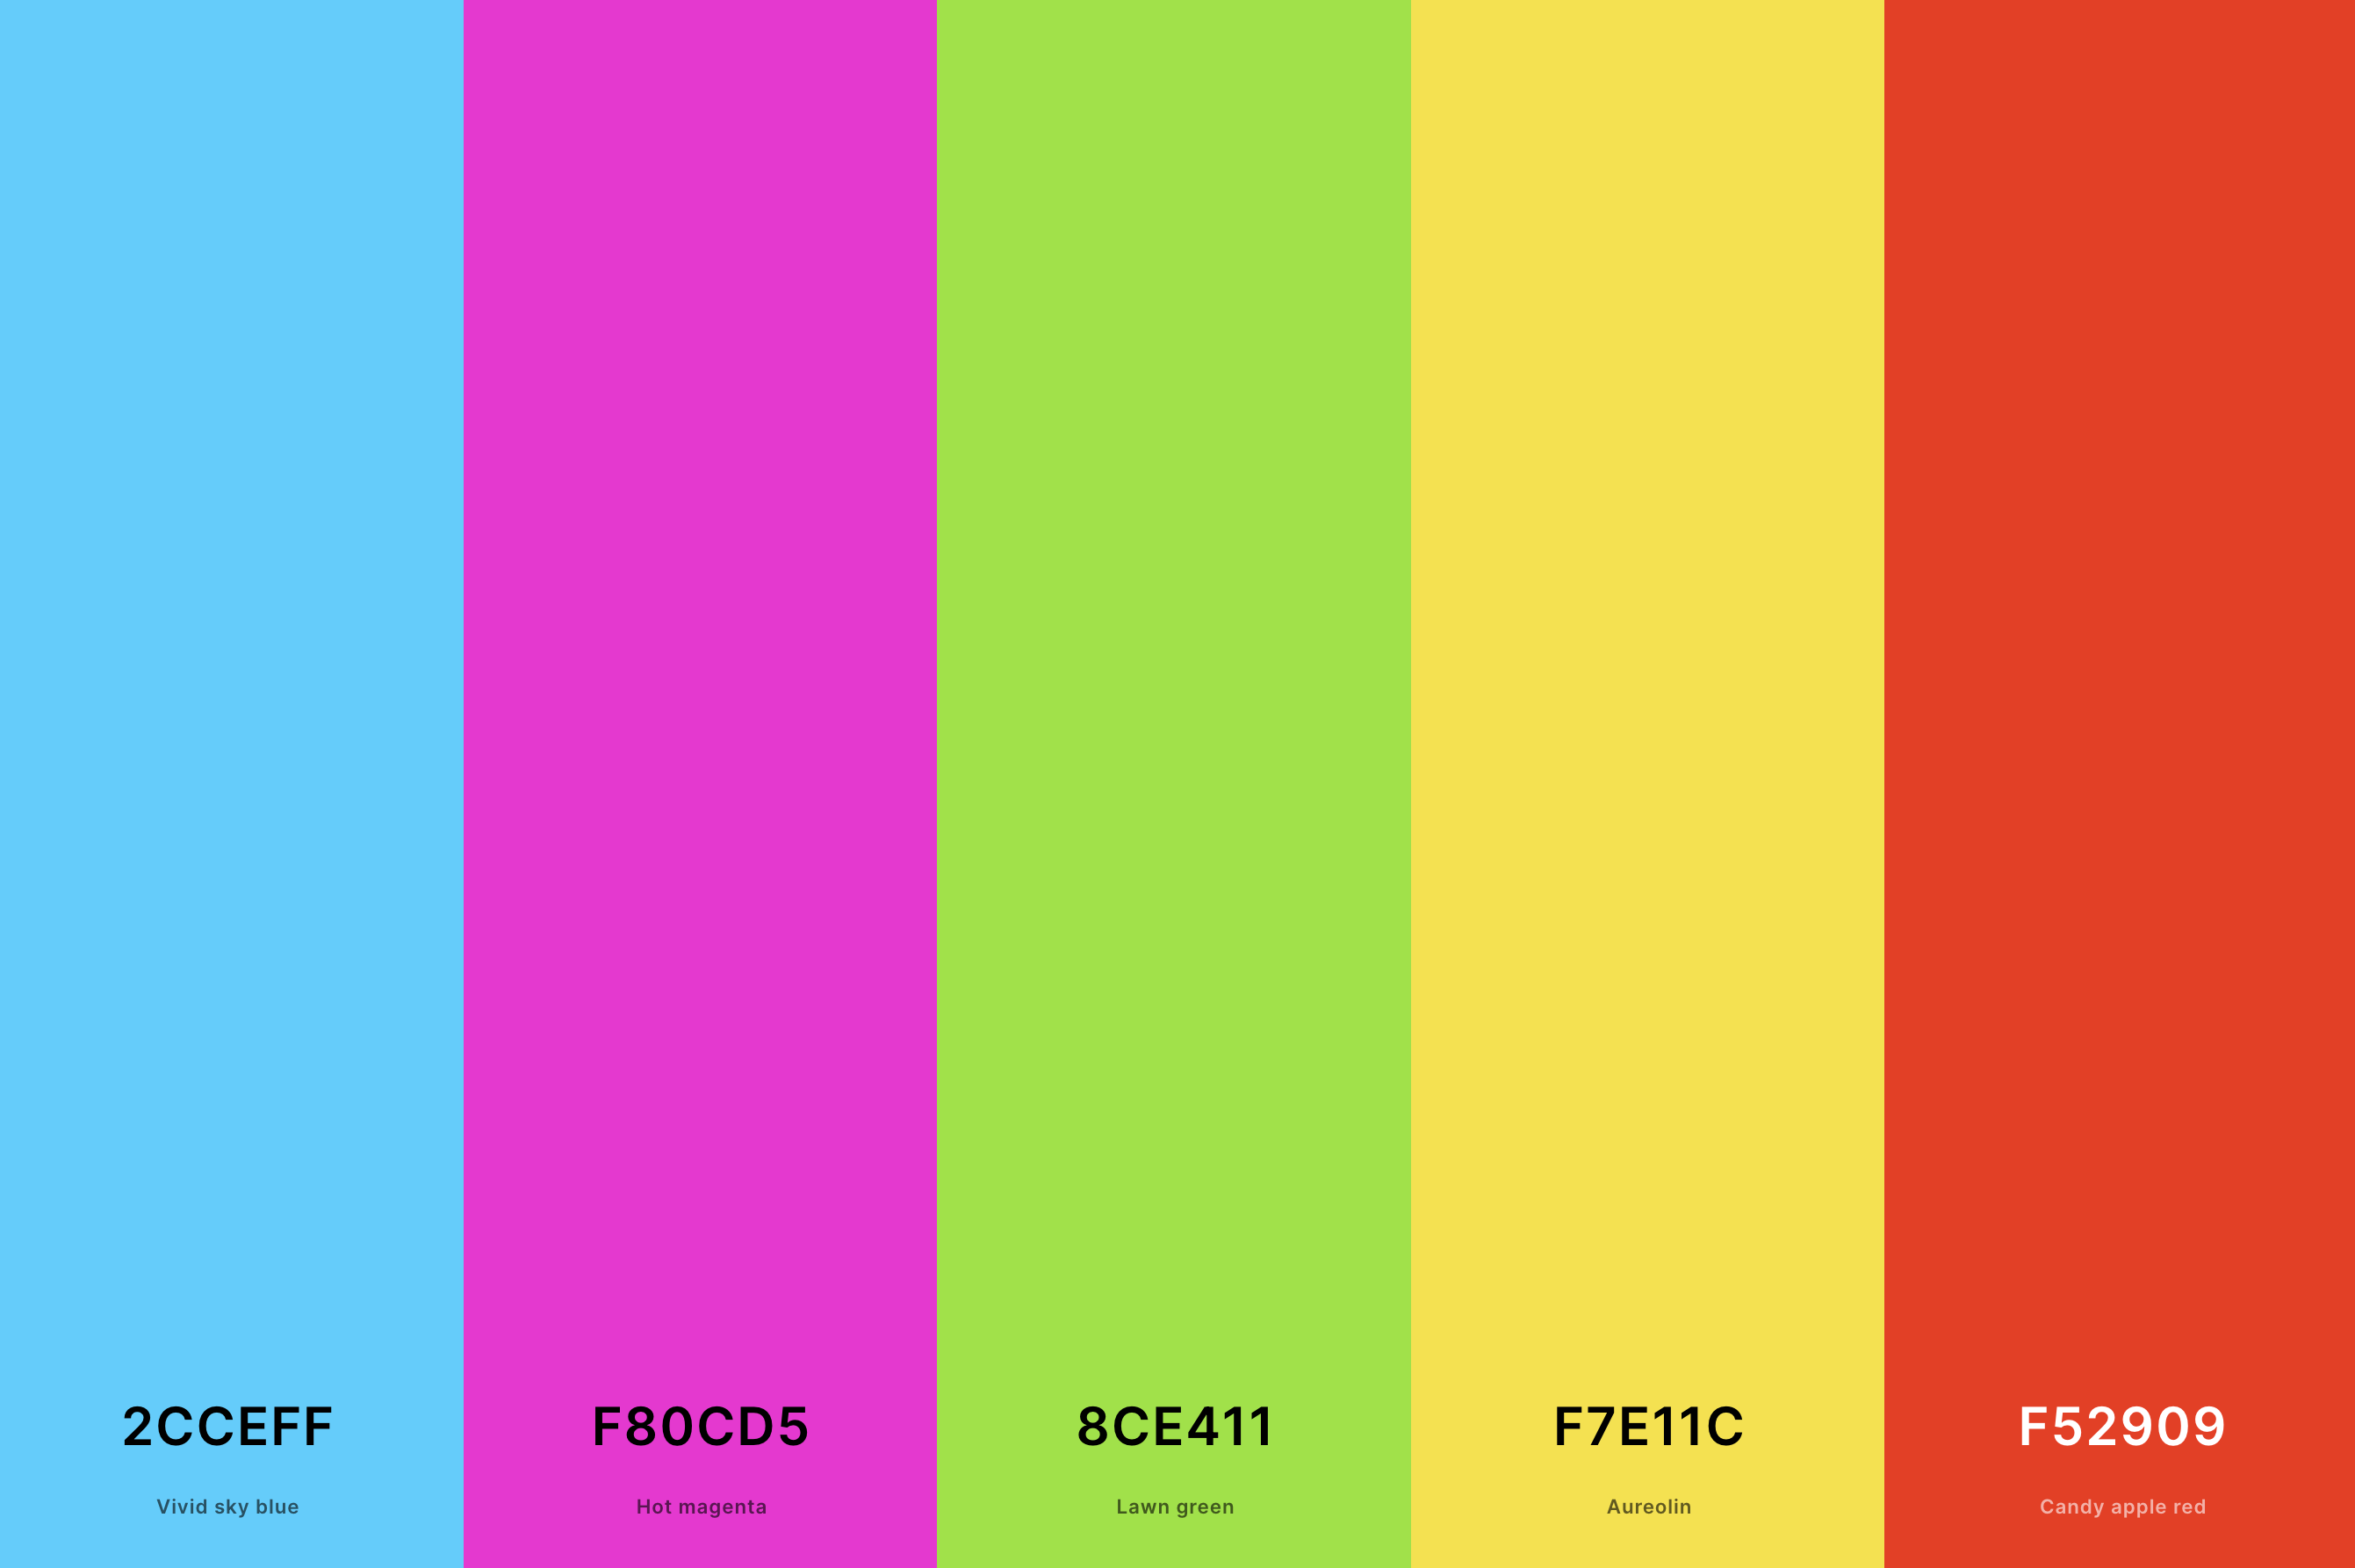 2. Bright Retro Color Palette Color Palette with Vivid Sky Blue (Hex #2CCEFF) + Hot Magenta (Hex #F80CD5) + Lawn Green (Hex #8CE411) + Aureolin (Hex #F7E11C) + Candy Apple Red (Hex #F52909) Color Palette with Hex Codes